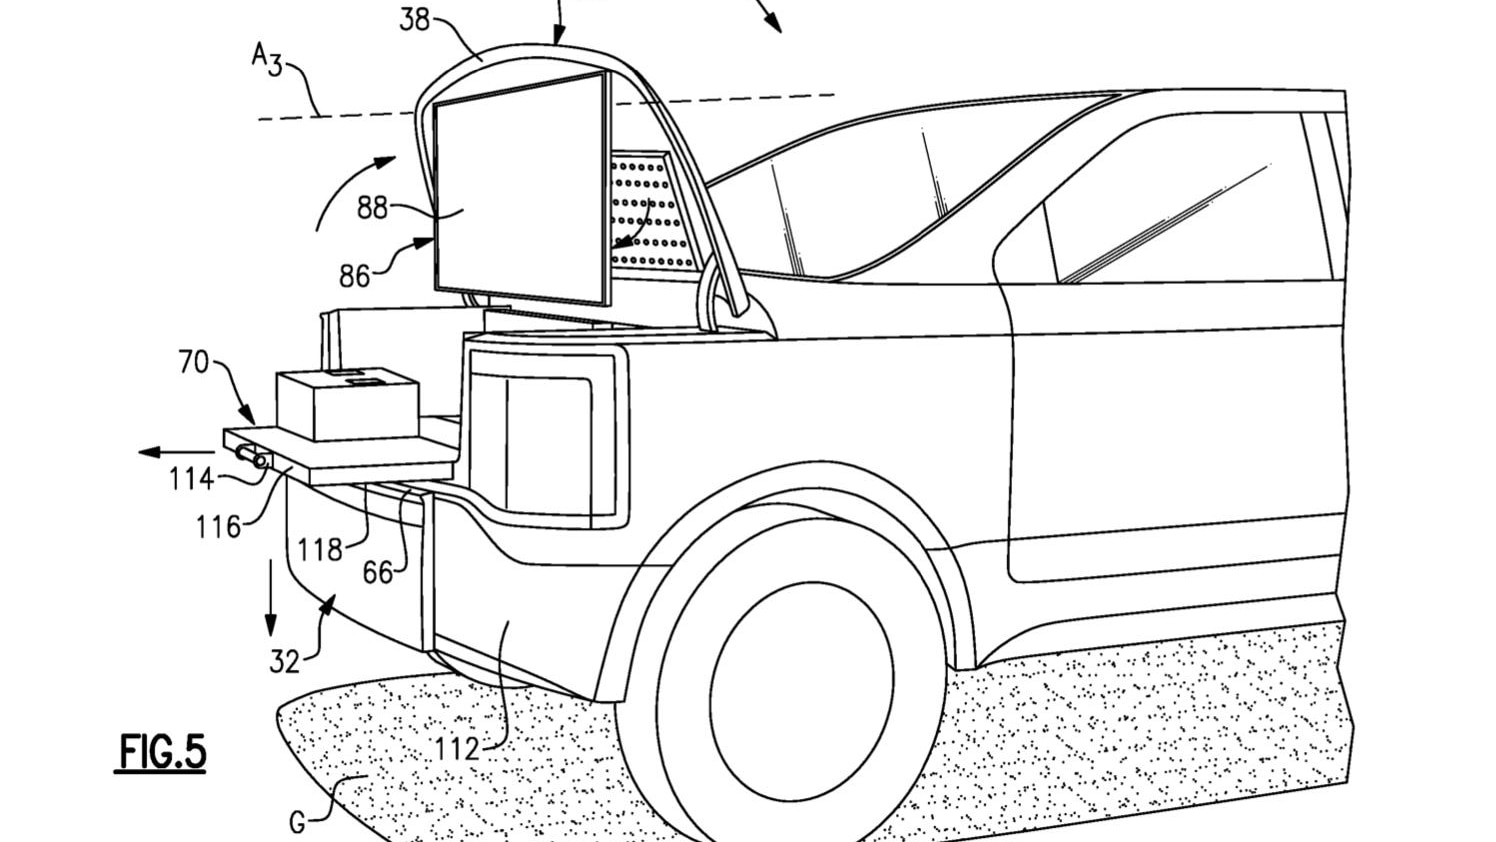 Ford's Innovative Frunk Could Change Road Trip Snacks Forever